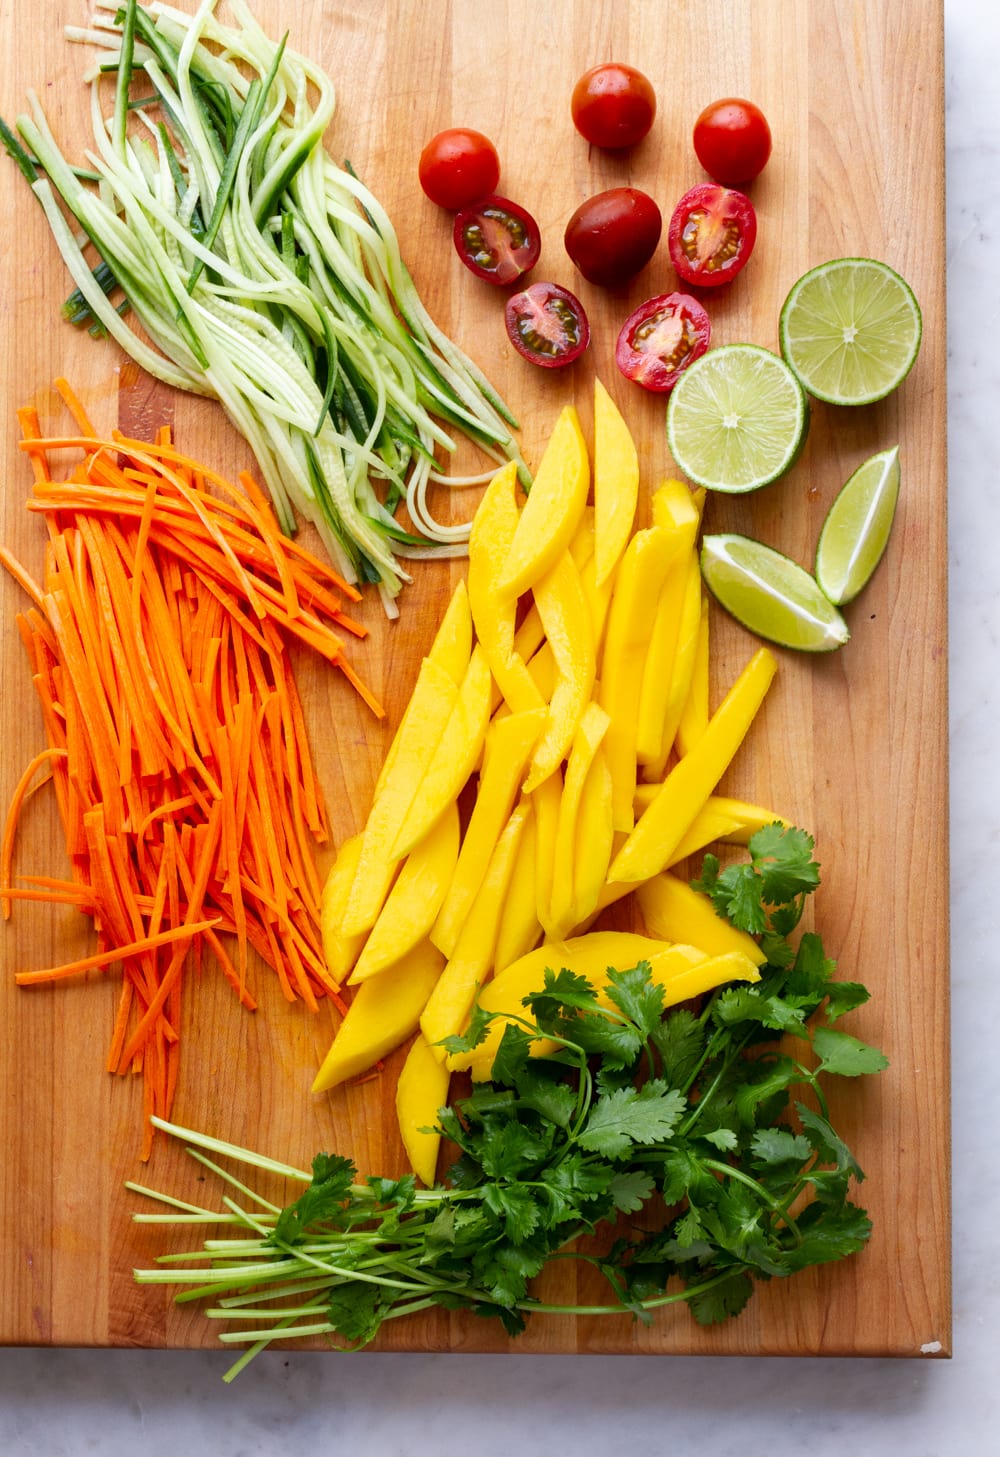 top down view of prepped carrots, cucumber, mango tomatoes, cilantro and lime wedges on a wooden cutting board